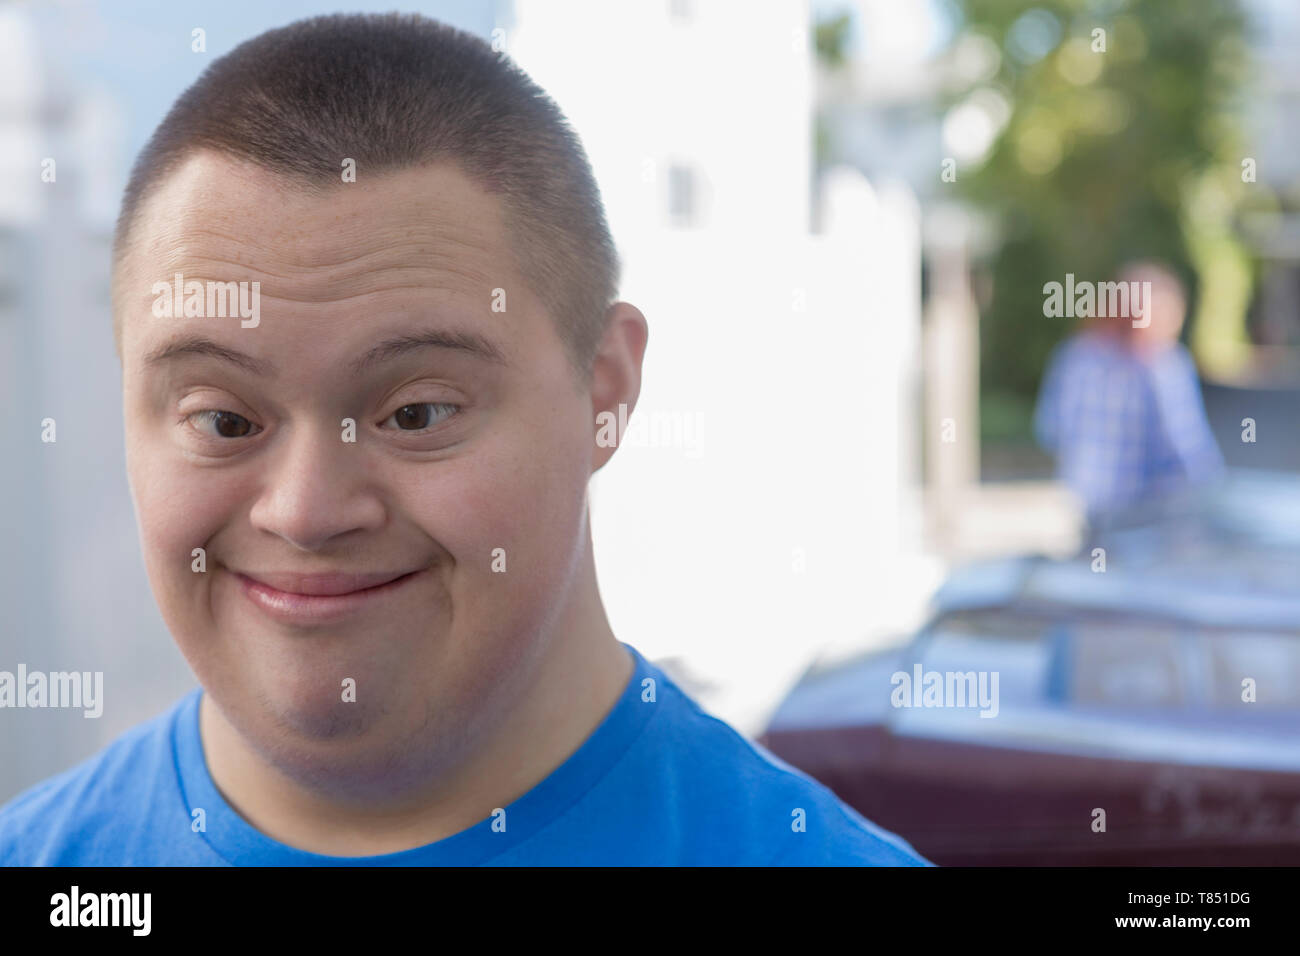 teen-with-down-syndrome-T851DG.jpg